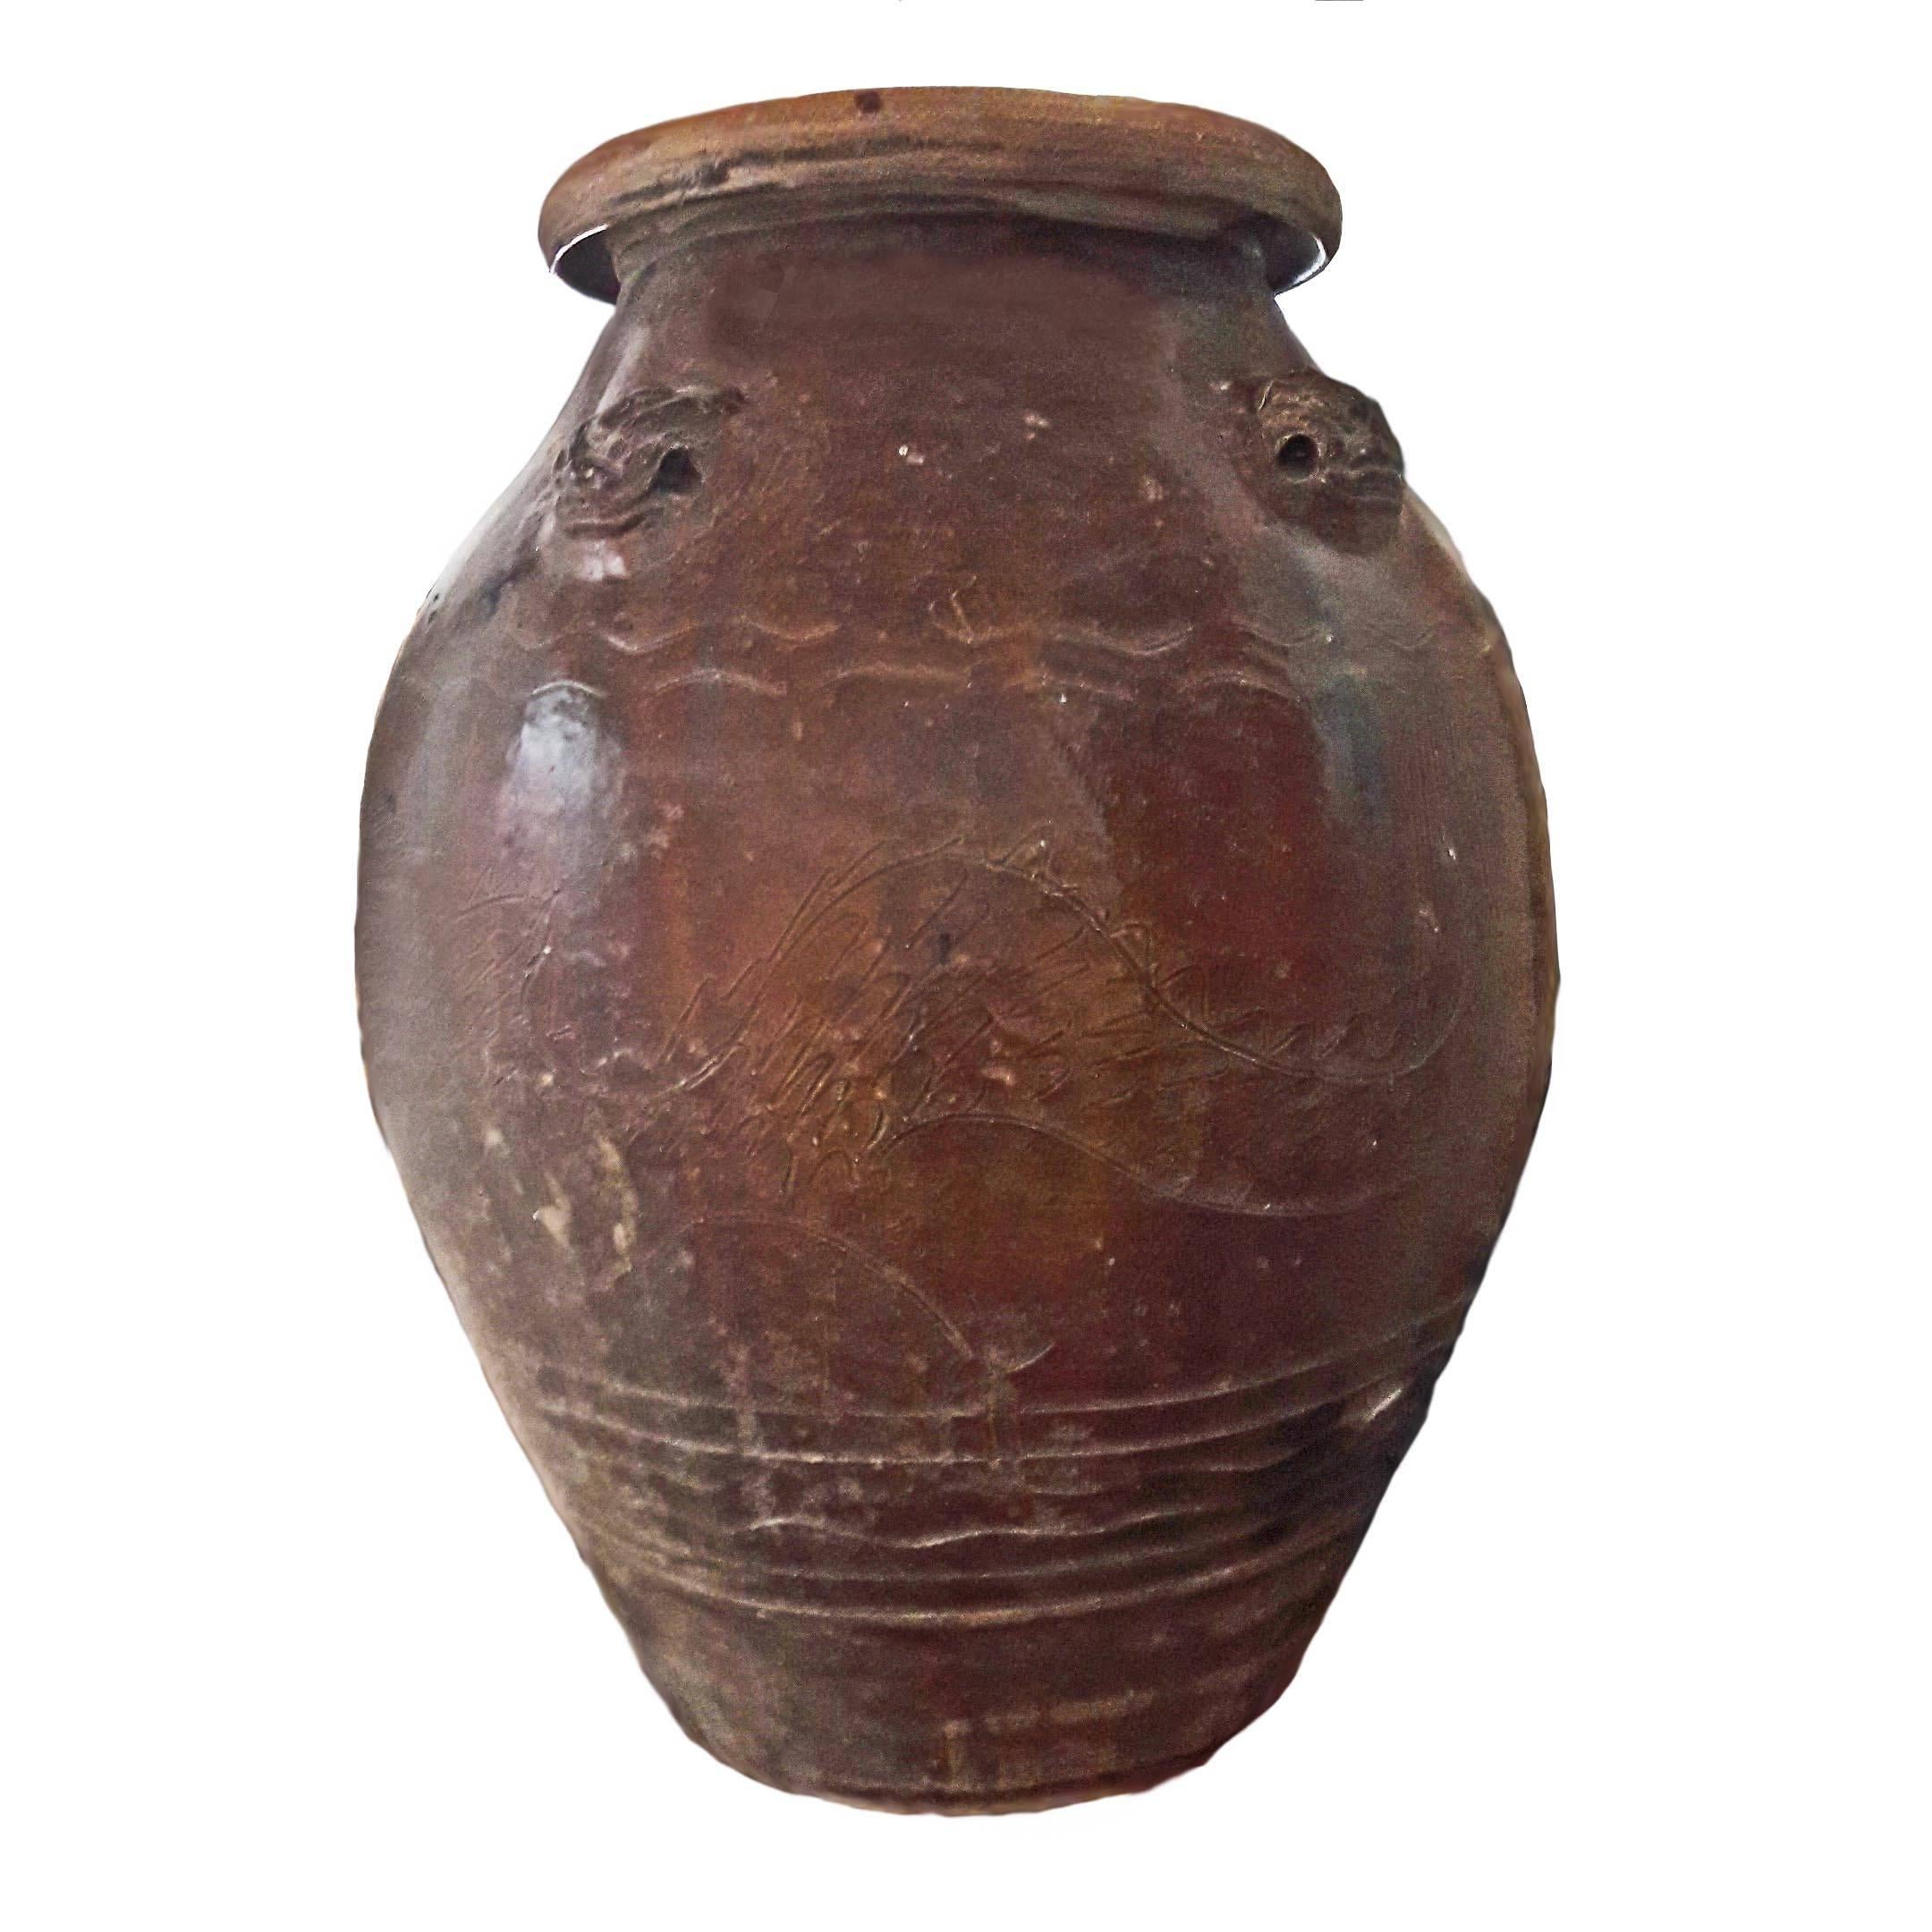 Glazed Terracotta Amphora / Jar from India, Early 20th Century